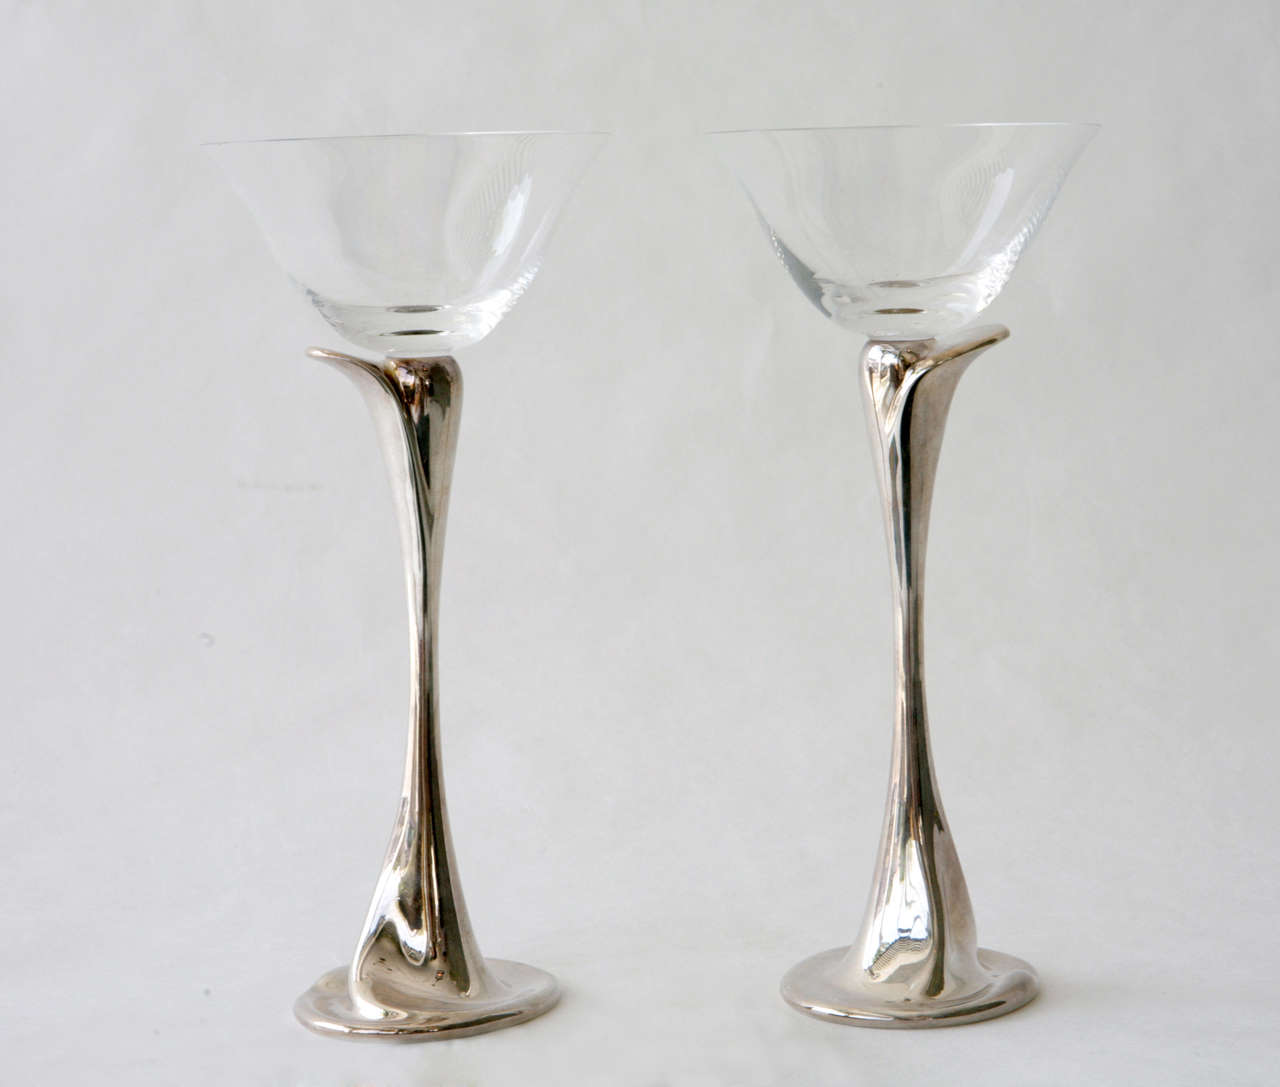 A lovely set of eight crystal and sterling goblets by Elsa Peretti for Tiffany & Co. Stamped on the bottom 